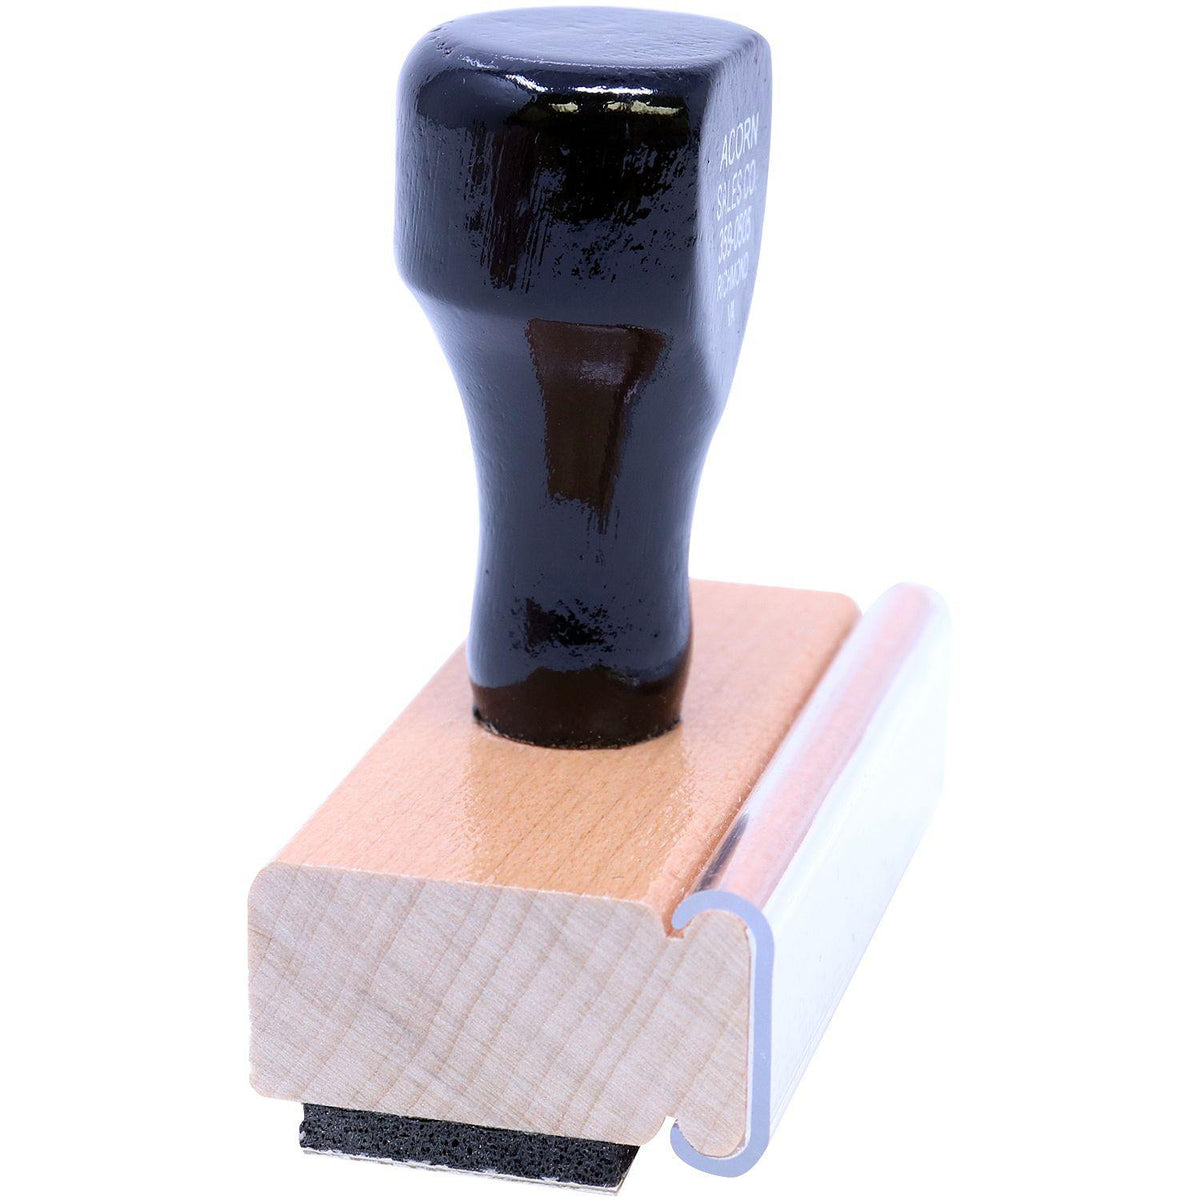 Side View of Closed Account Rubber Stamp at an Angle